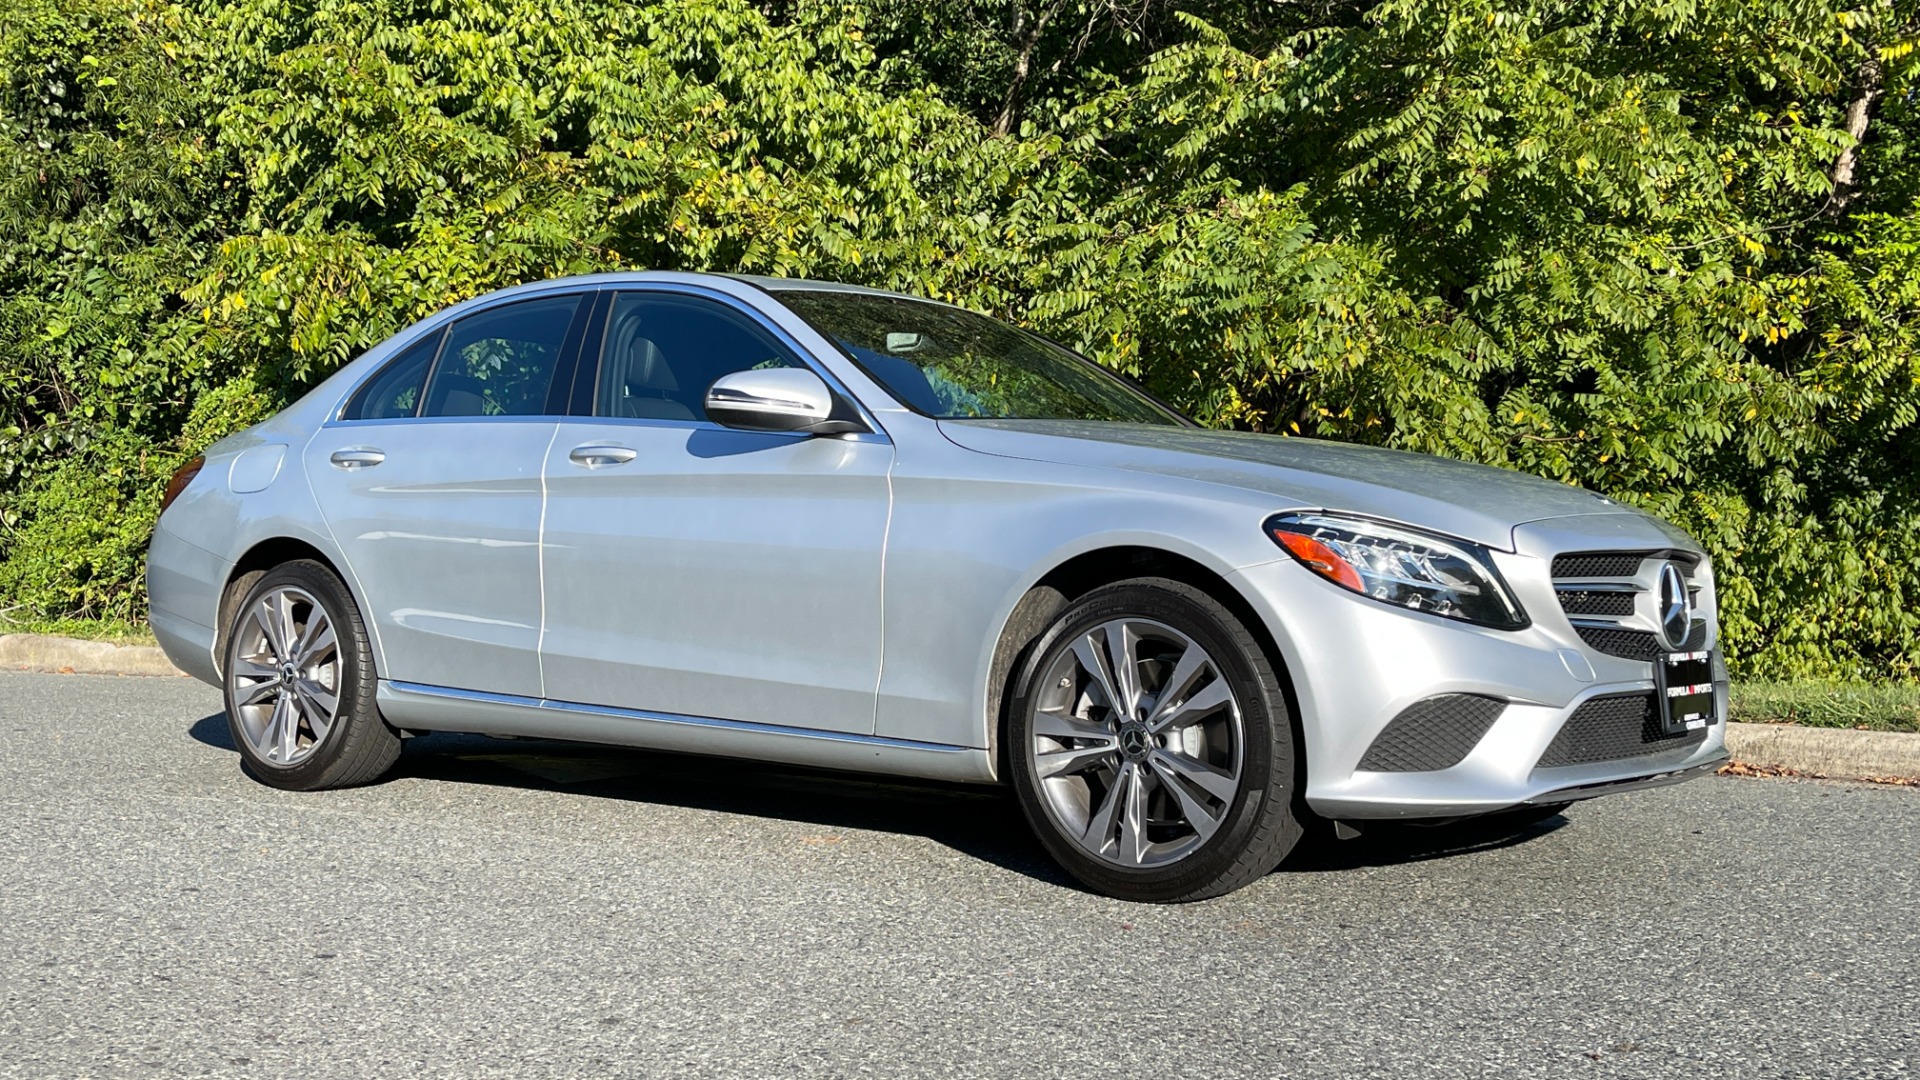 Used 2020 Mercedes-Benz C-Class C300 / BACKUP CAMERA / HEATED SEATS / WOOD GRAIN TRIM for sale $30,995 at Formula Imports in Charlotte NC 28227 7